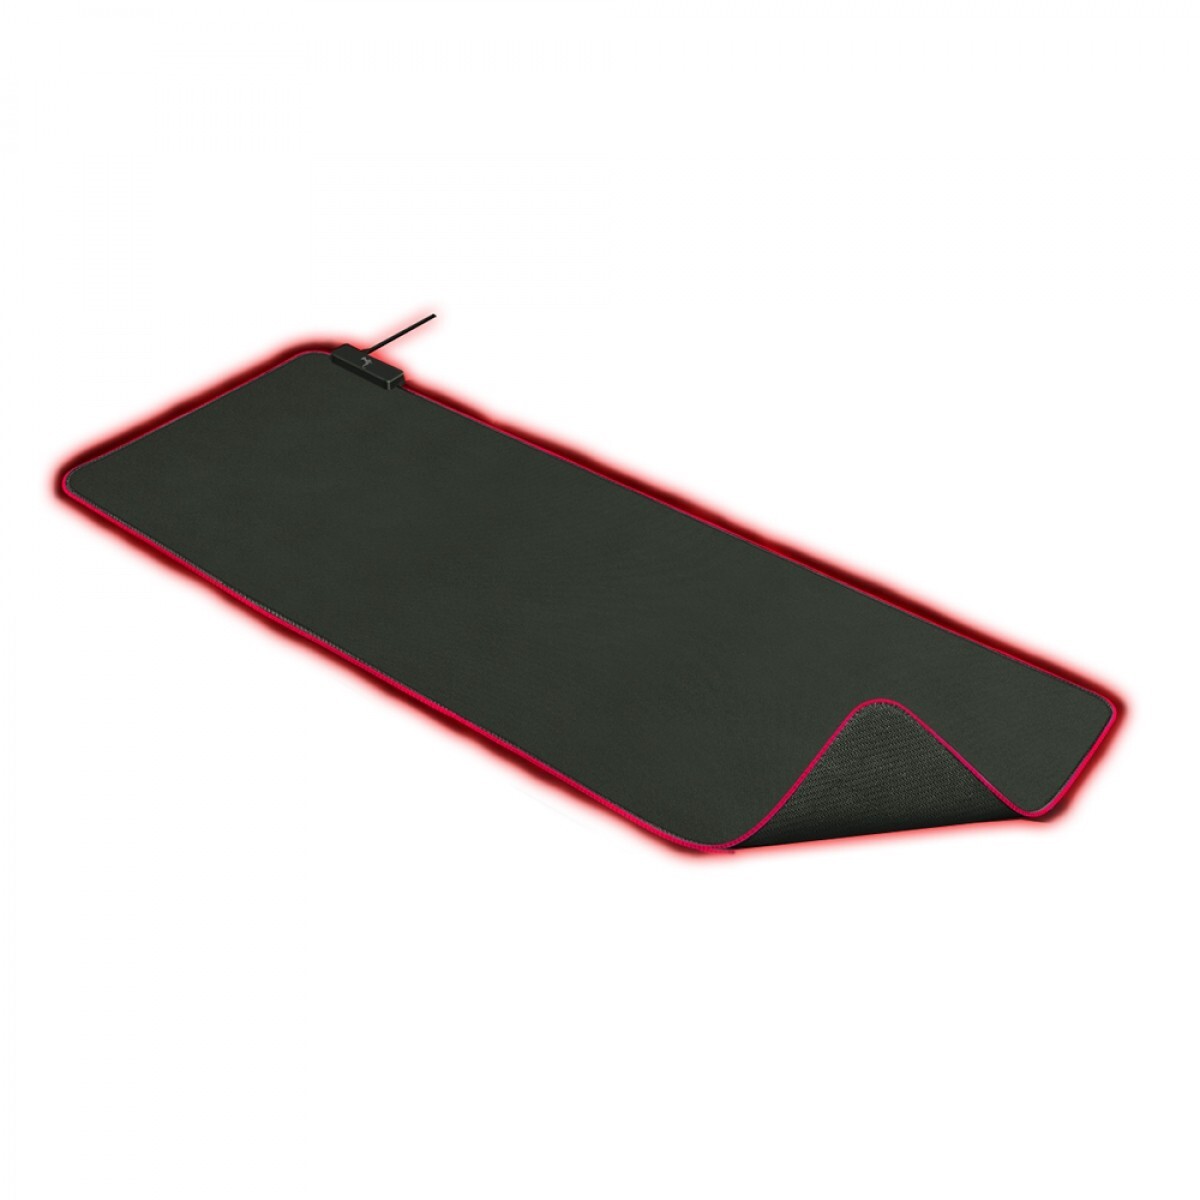 Mouse Pad Kolke gaming con luz KGD-504 